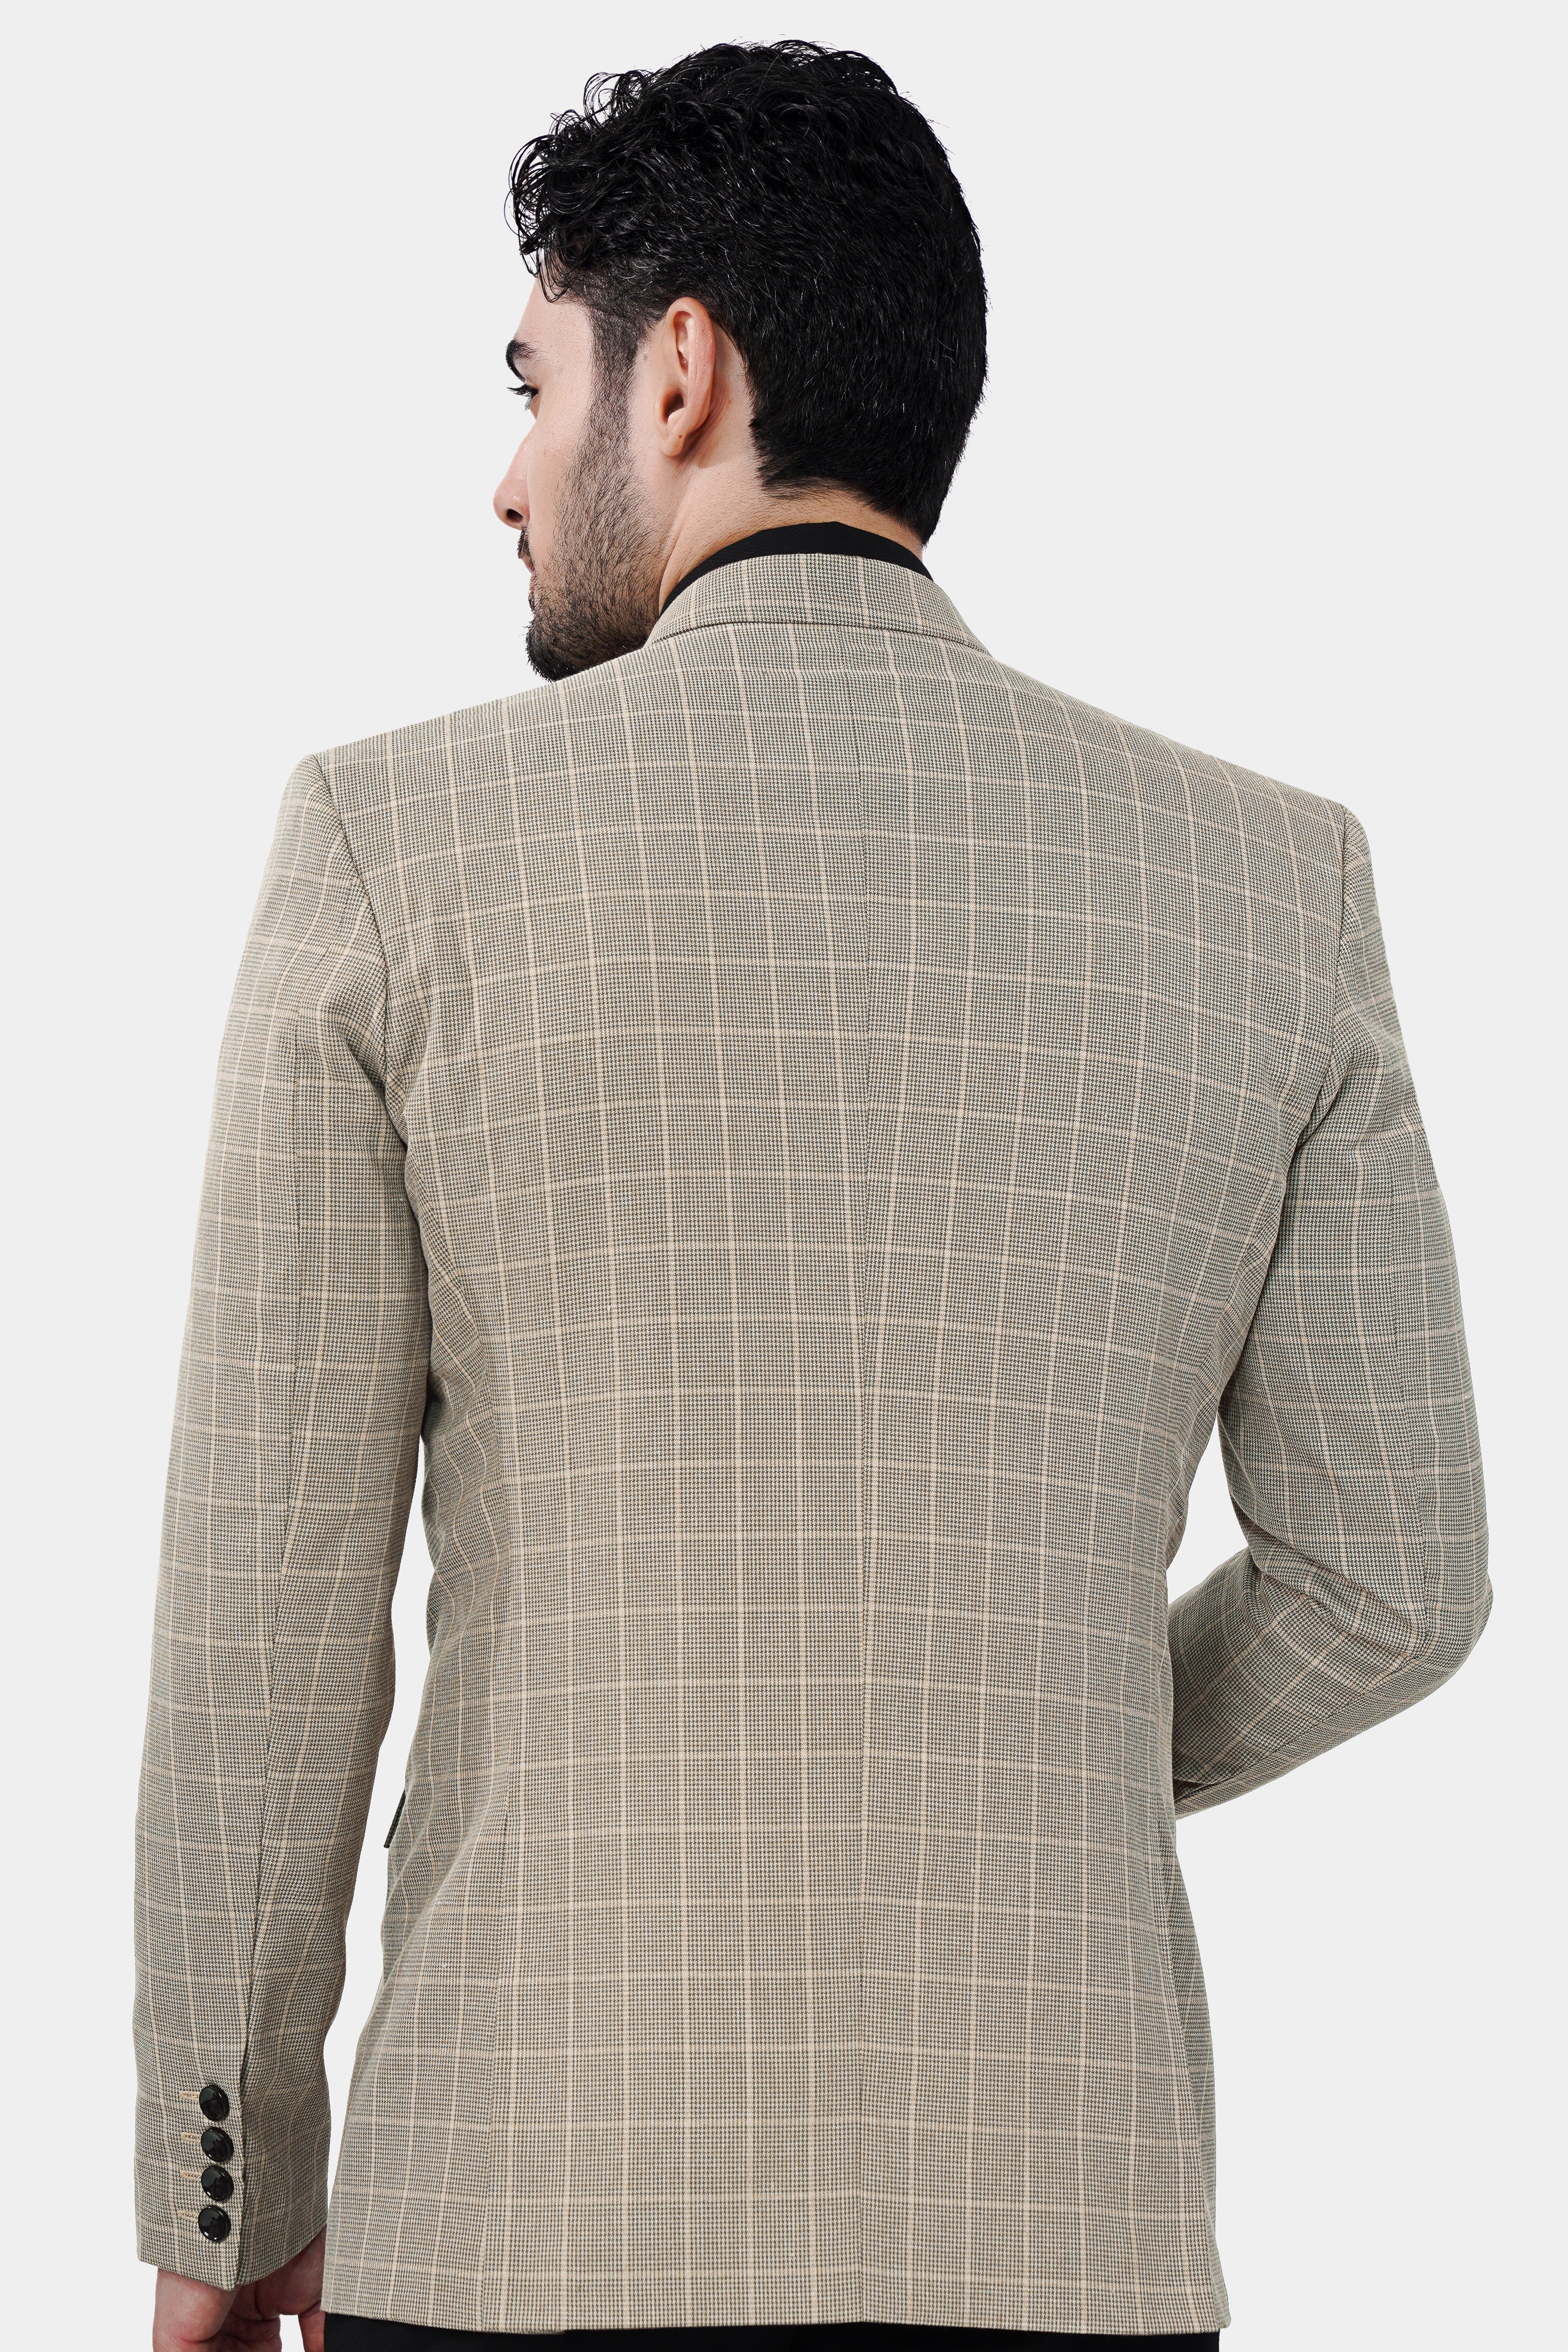 Apricot Brown Subtle Checkered Wool Rich Blazer BL3008-SB-36, BL3008-SB-38, BL3008-SB-40, BL3008-SB-42, BL3008-SB-44, BL3008-SB-46, BL3008-SB-48, BL3008-SB-50, BL3008-SB-52, BL3008-SB-54, BL3008-SB-56, BL3008-SB-58, BL3008-SB-60